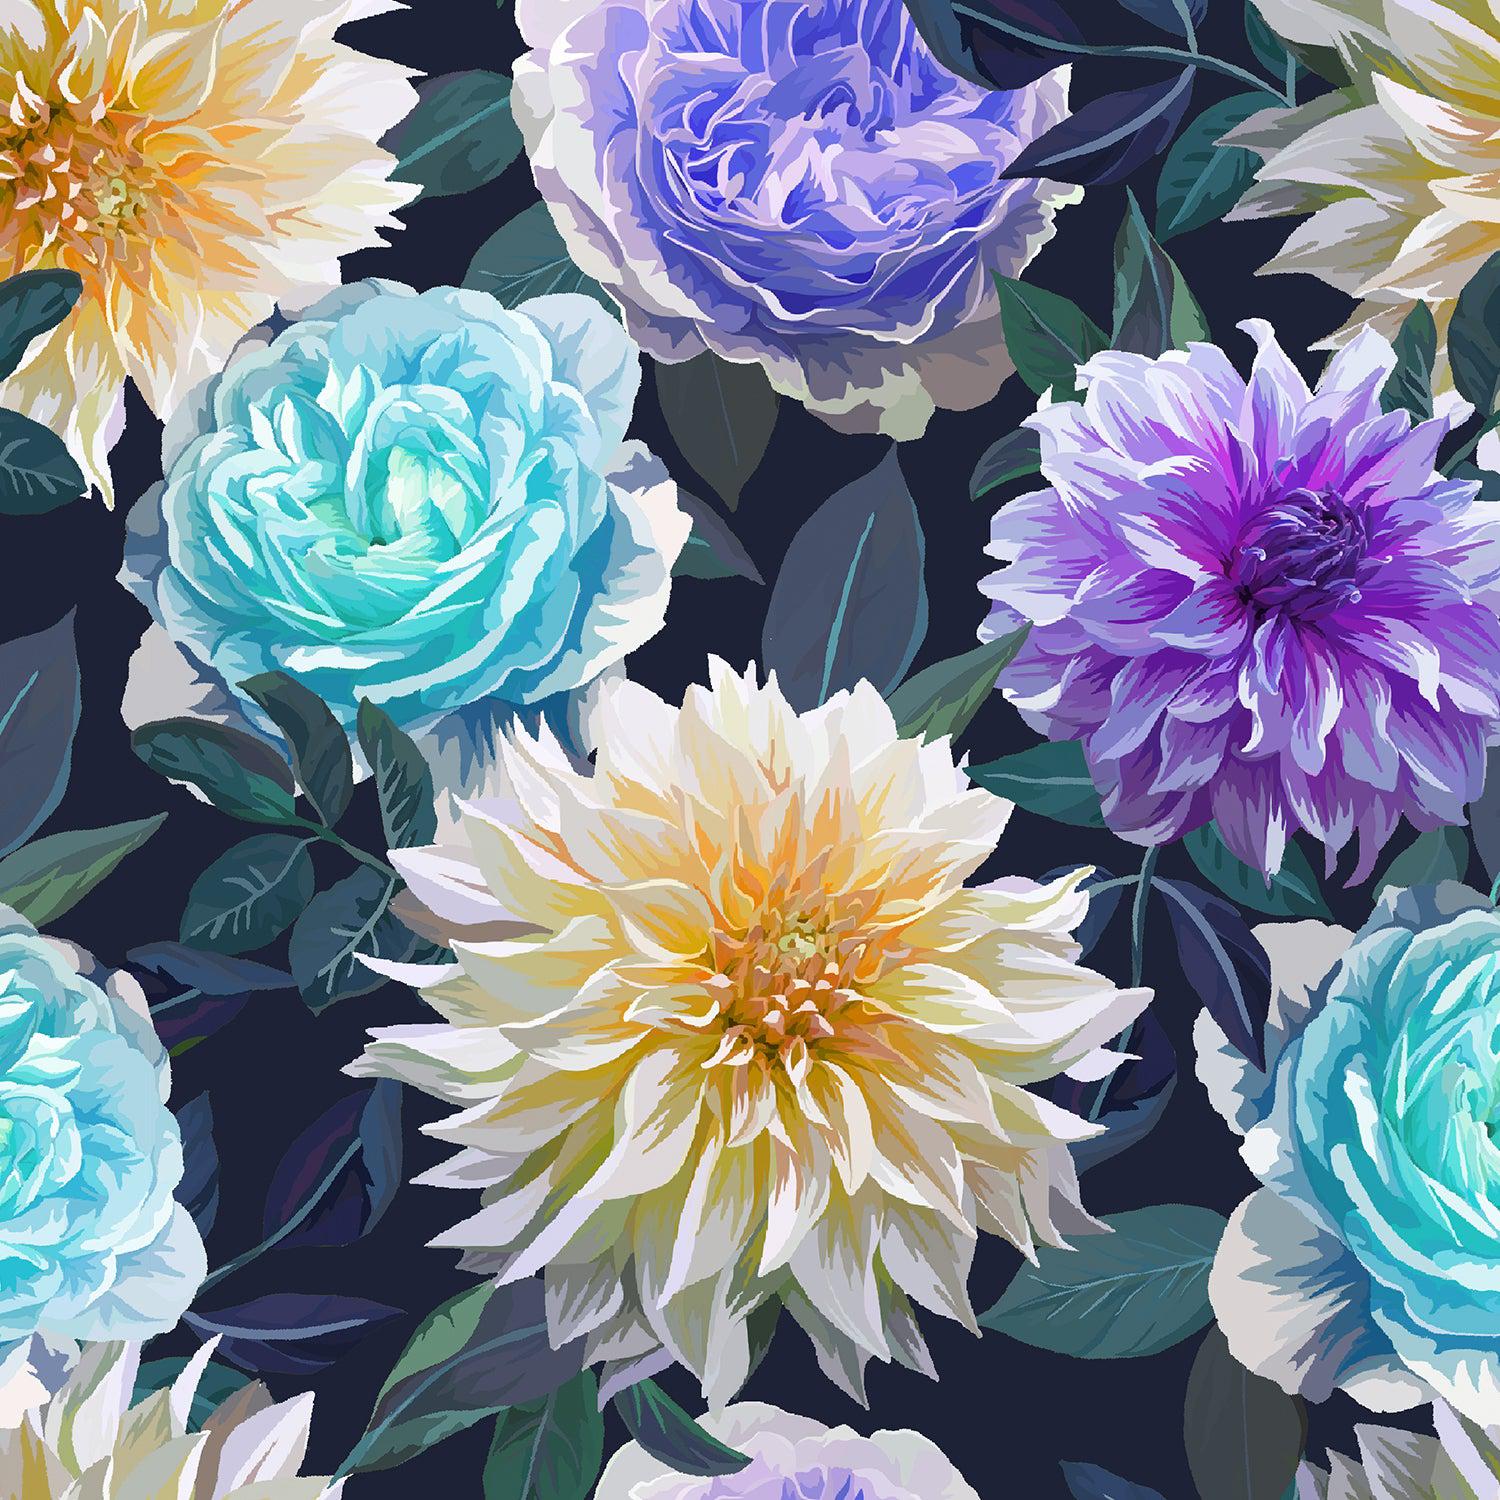 RJR-Dreaming of Dahlias Moonlit Blue-fabric-gather here online